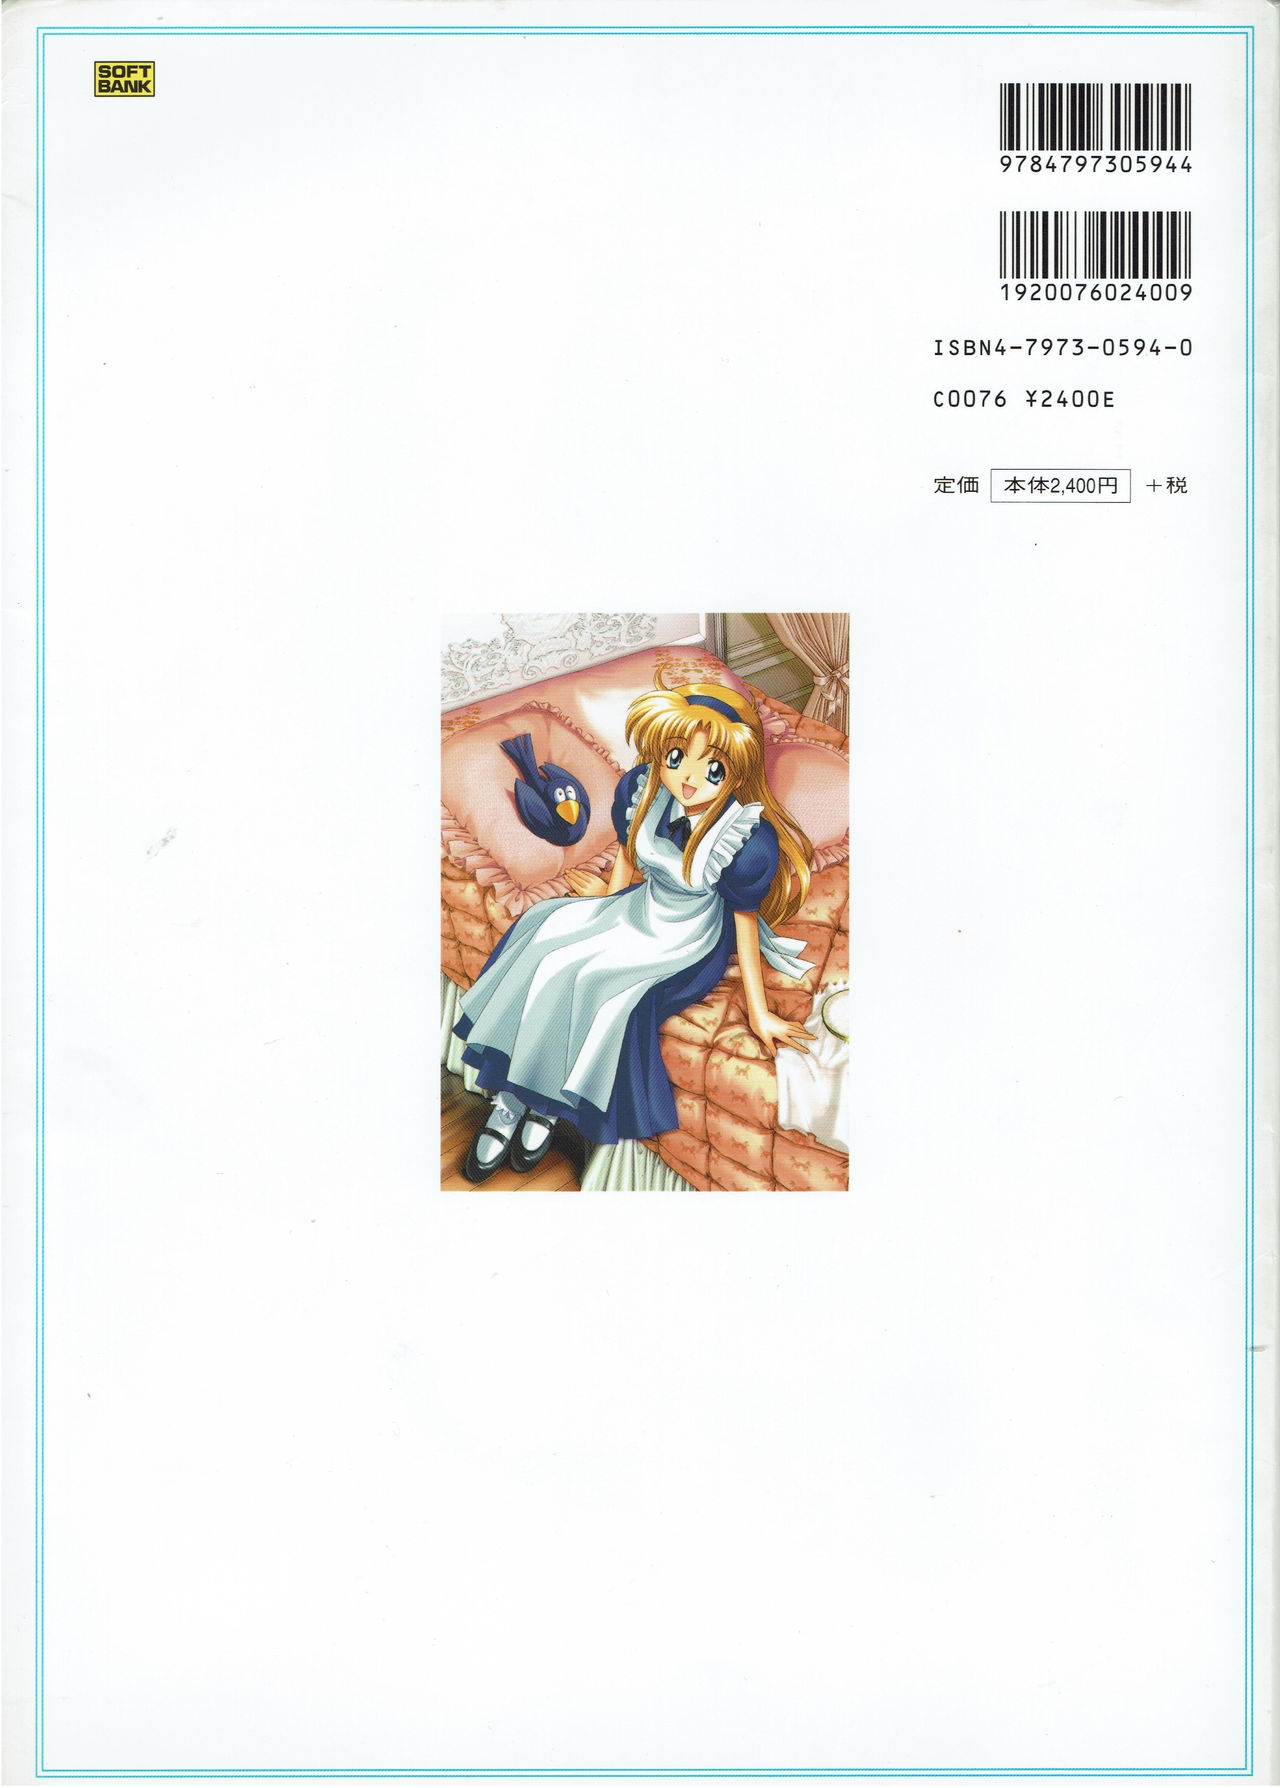 Alice no Yakata 456 Official Guide 203